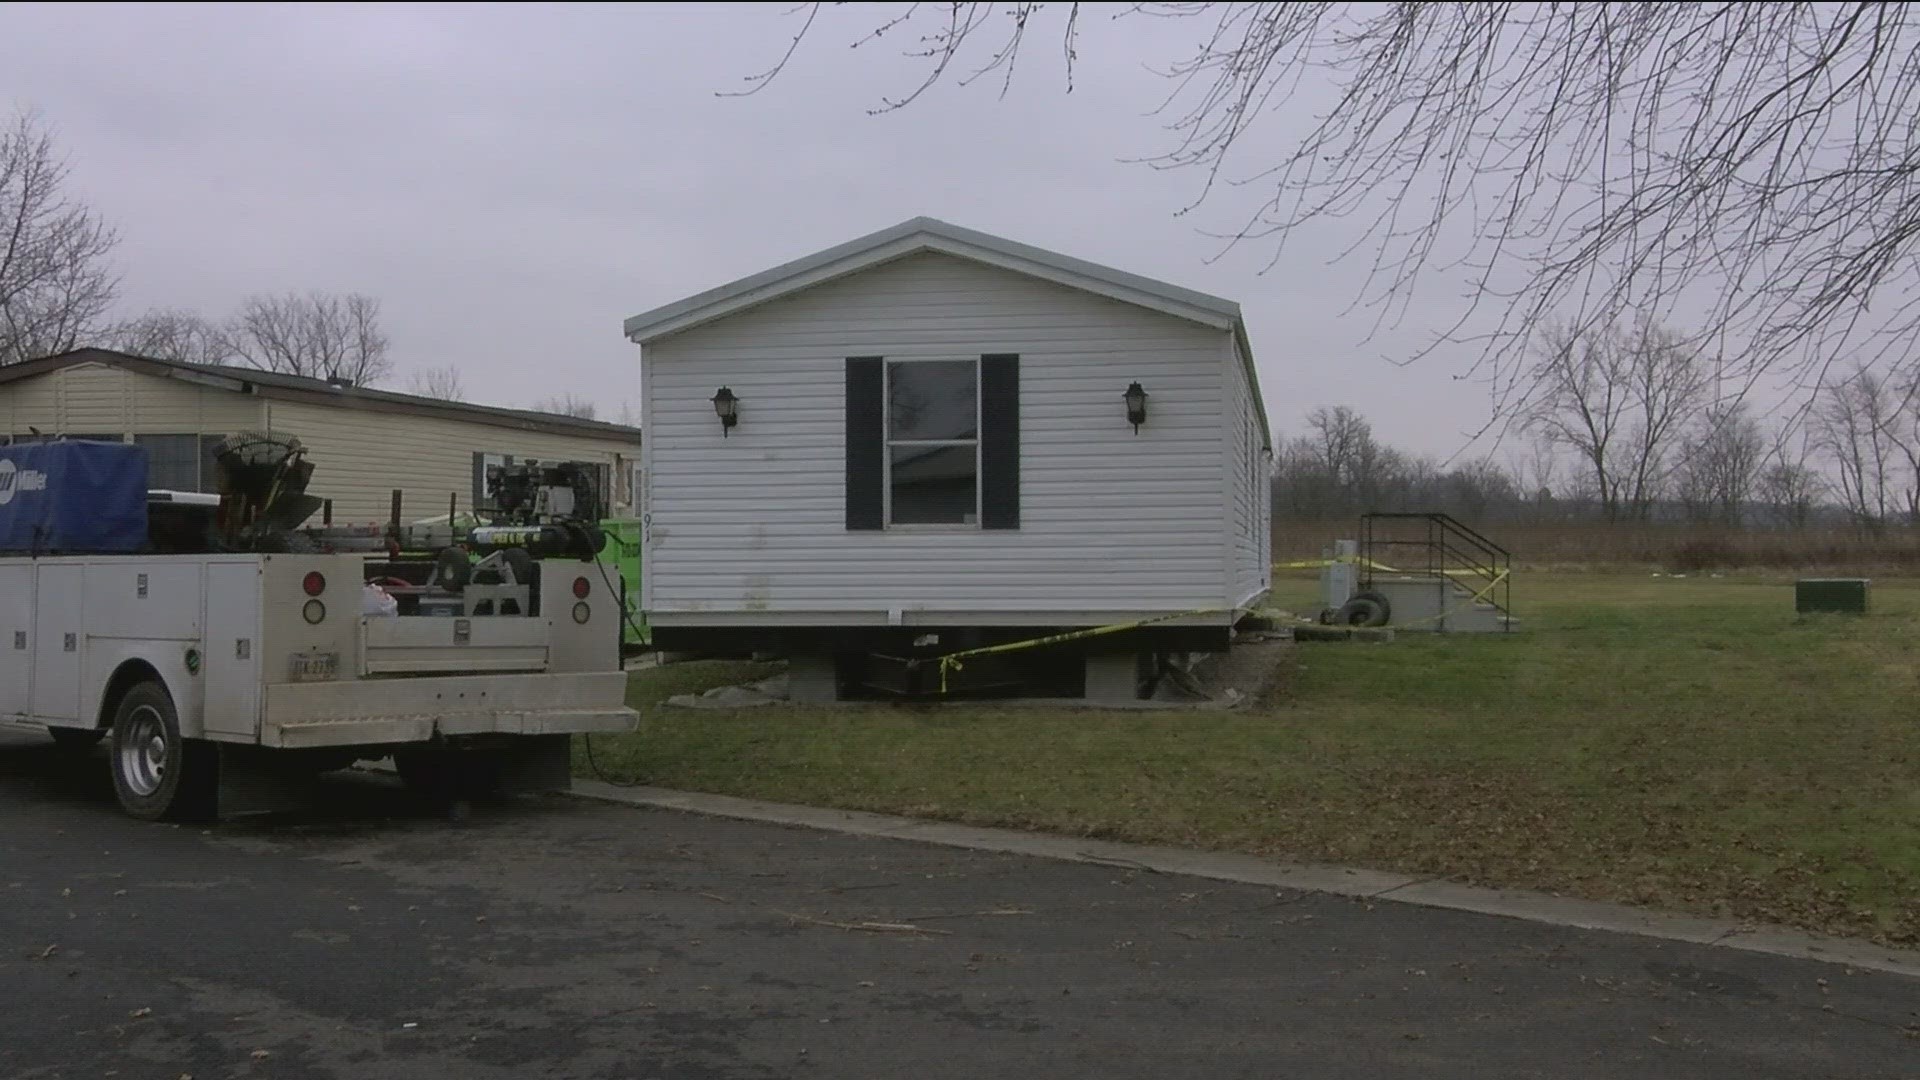 OSHA and the Seneca County Sheriff's Department were on scene following an incident where two men were crushed underneath a mobile home after attempting to move it.